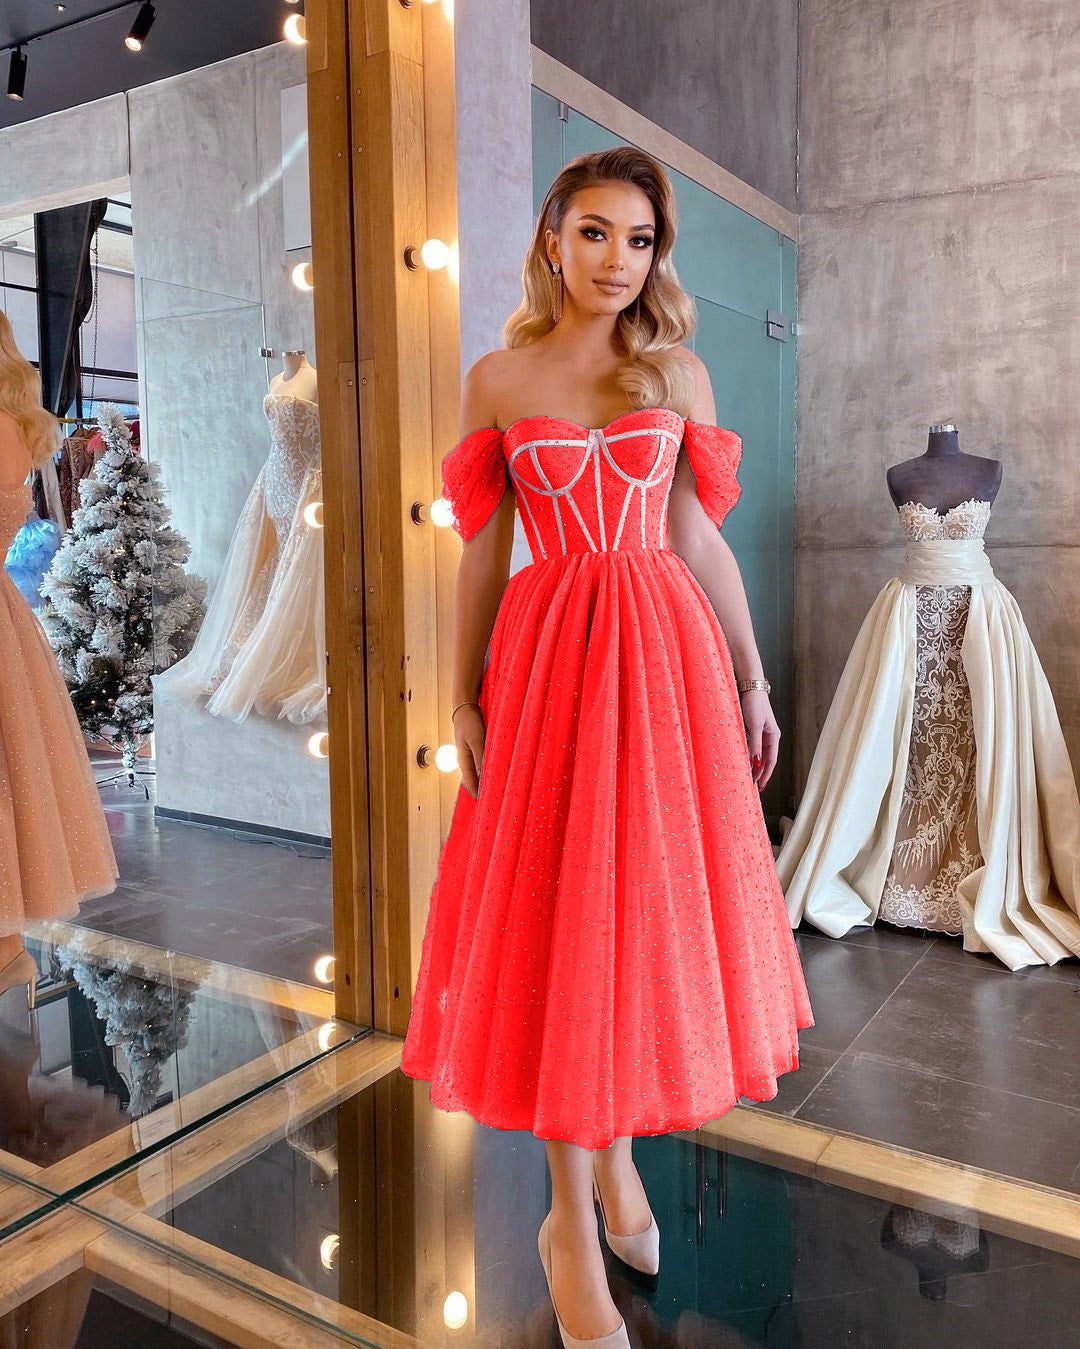 2022 Spring/Summer New One the shoulder Prom Party Dress Sexy Sequined Fashion Temperament Elegant Woman Evening Dresses